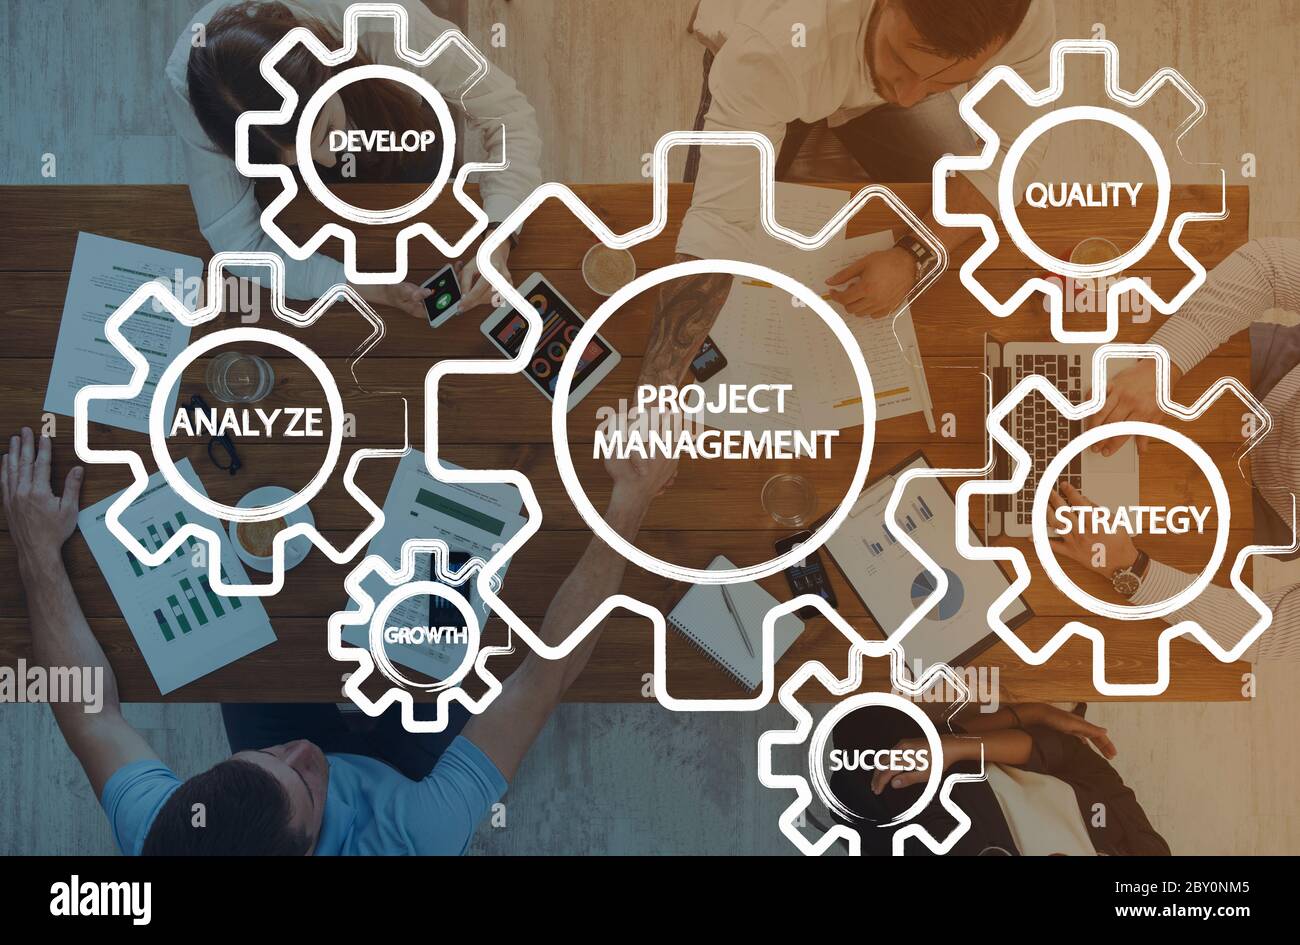 Gears with project management features over business team Stock Photo